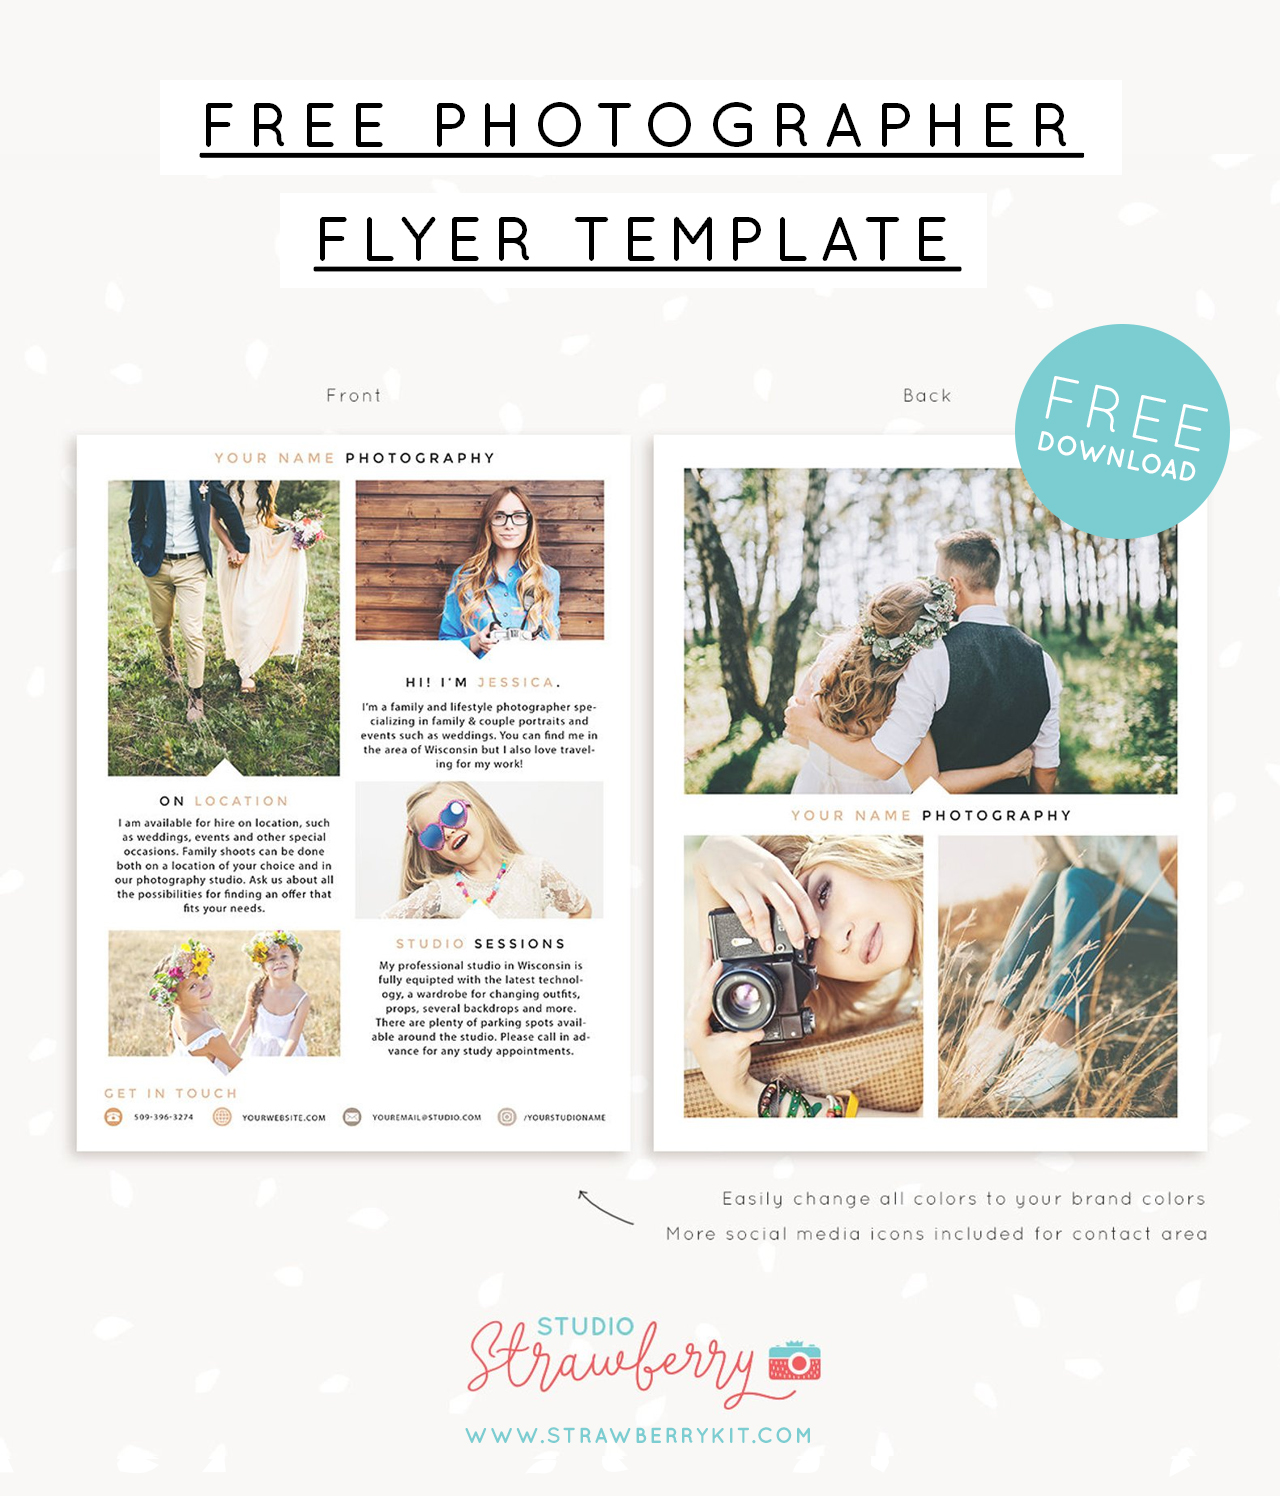 Free photographer flyer template